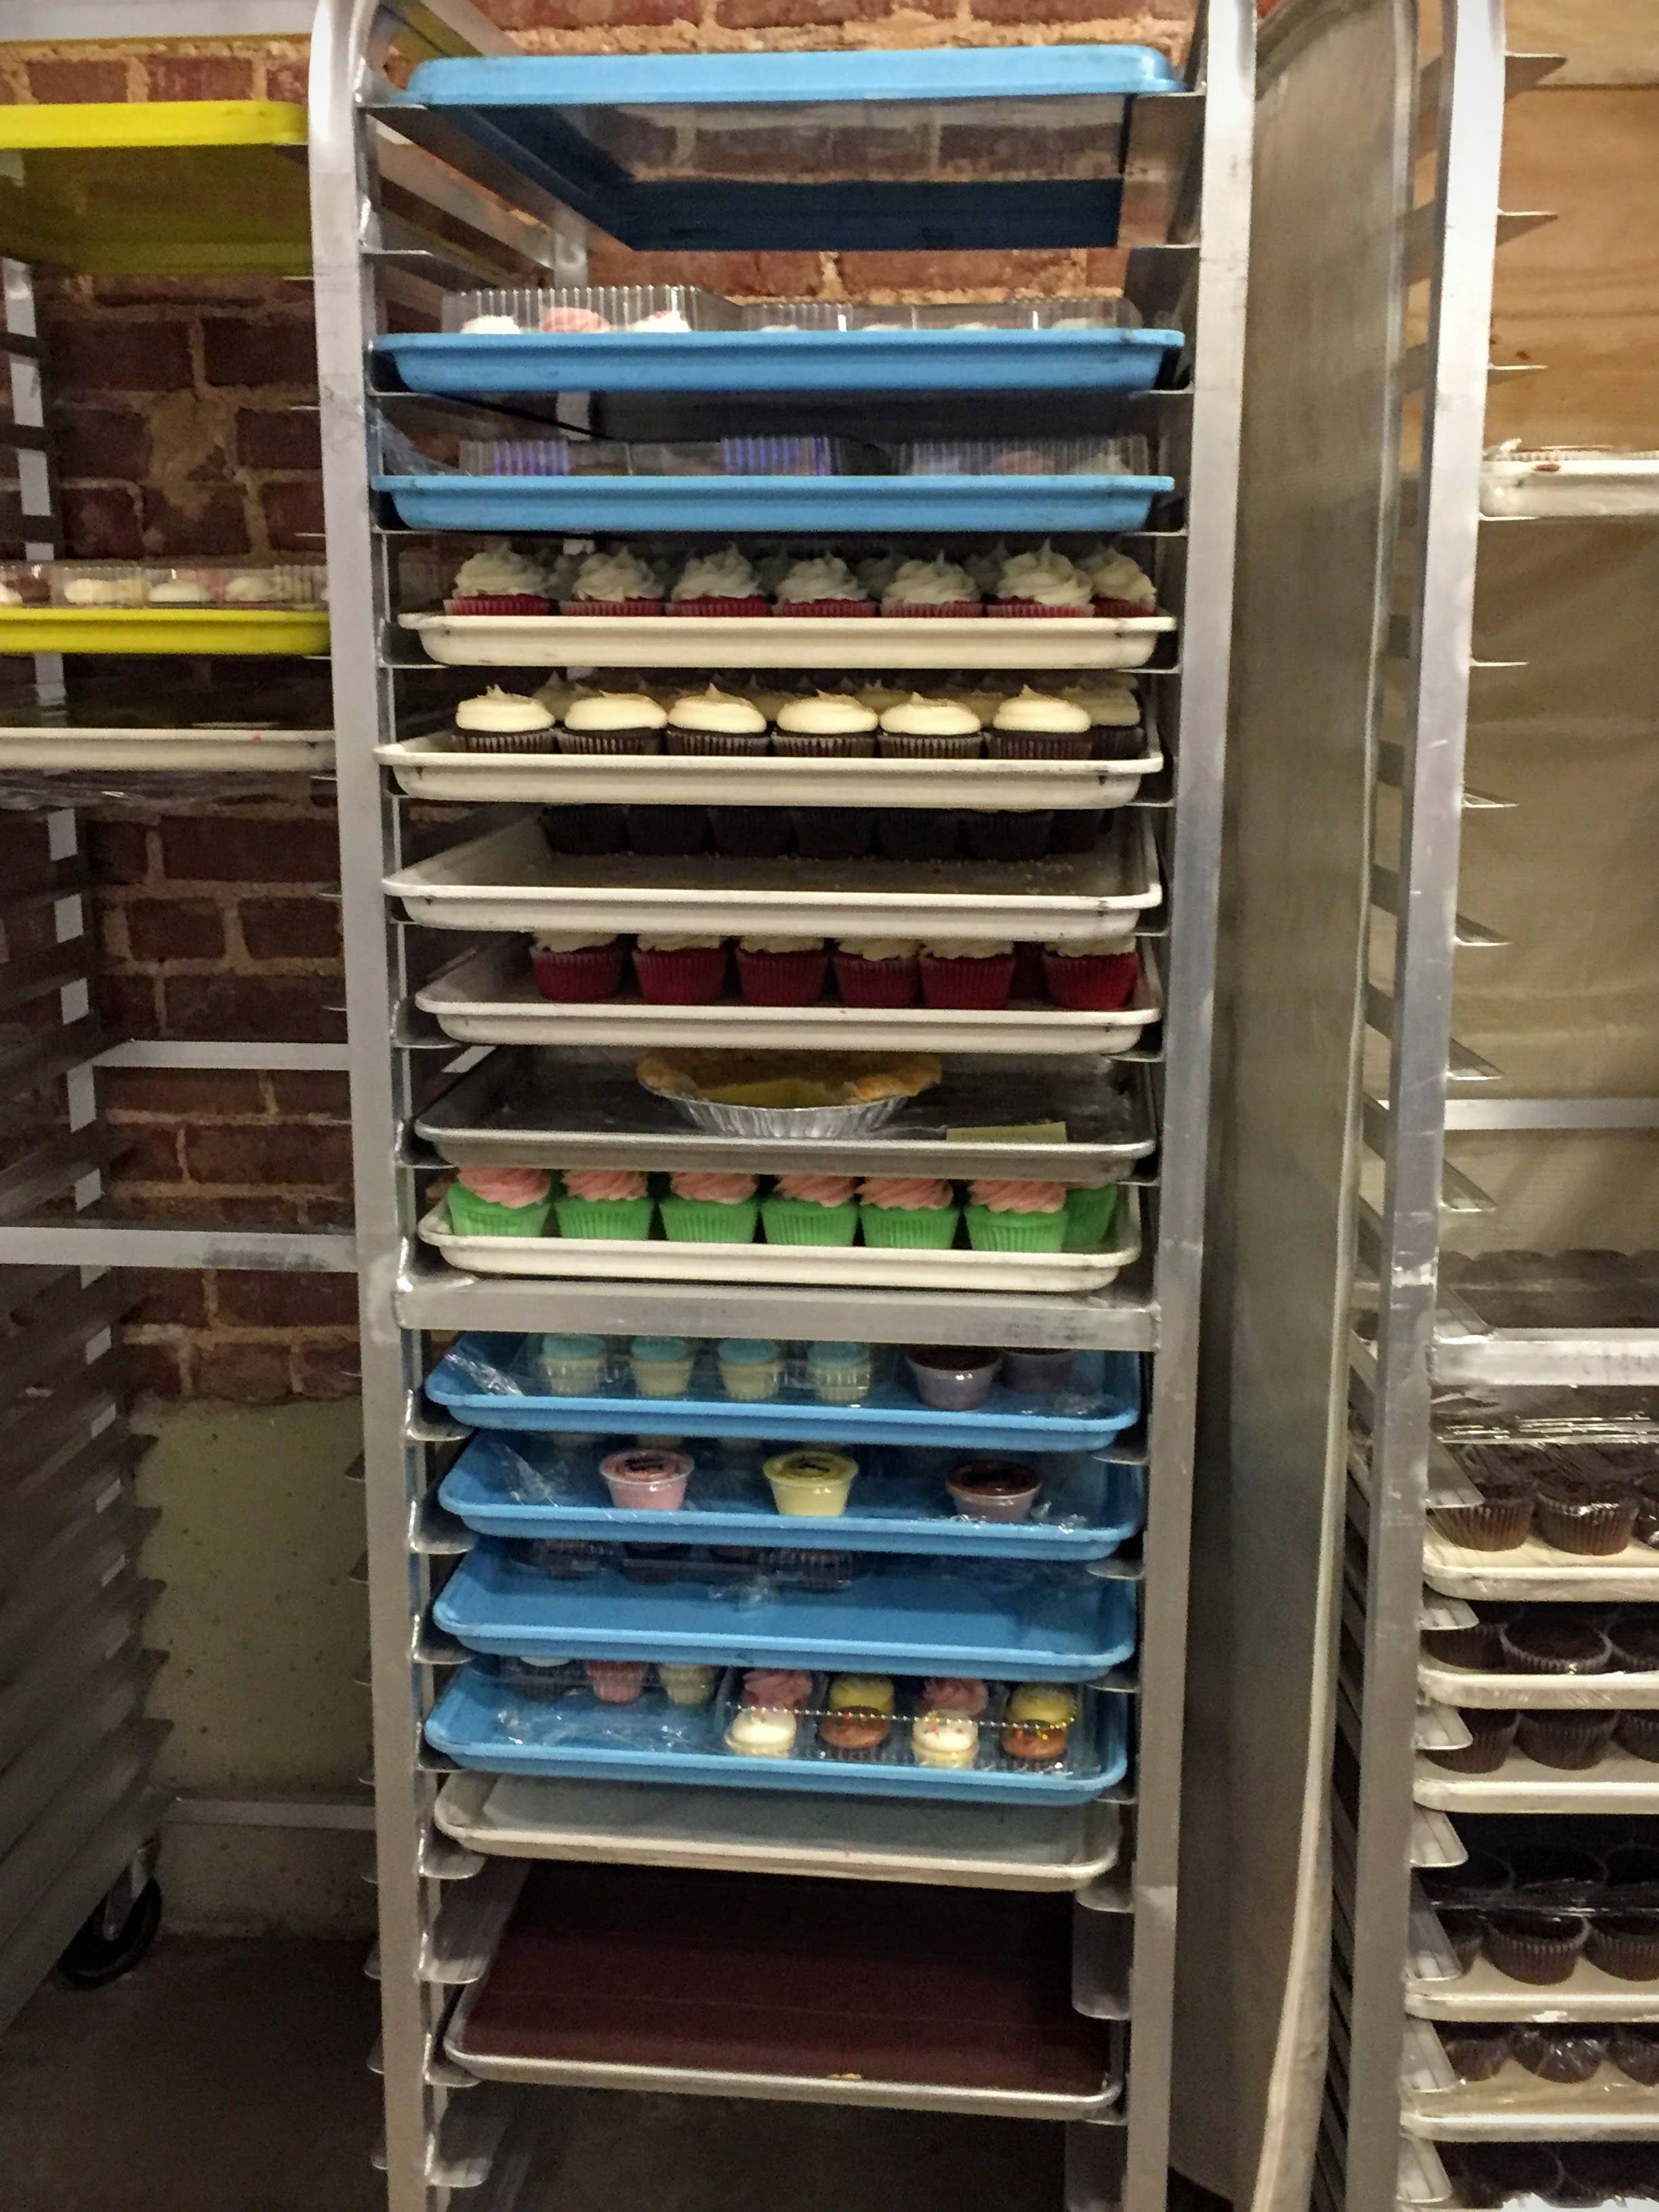 We walked by the huge walk-in freezer and then by these trays of cupcakes. The color of the tray signifies the Muddy's location where the cupcakes will end up! 